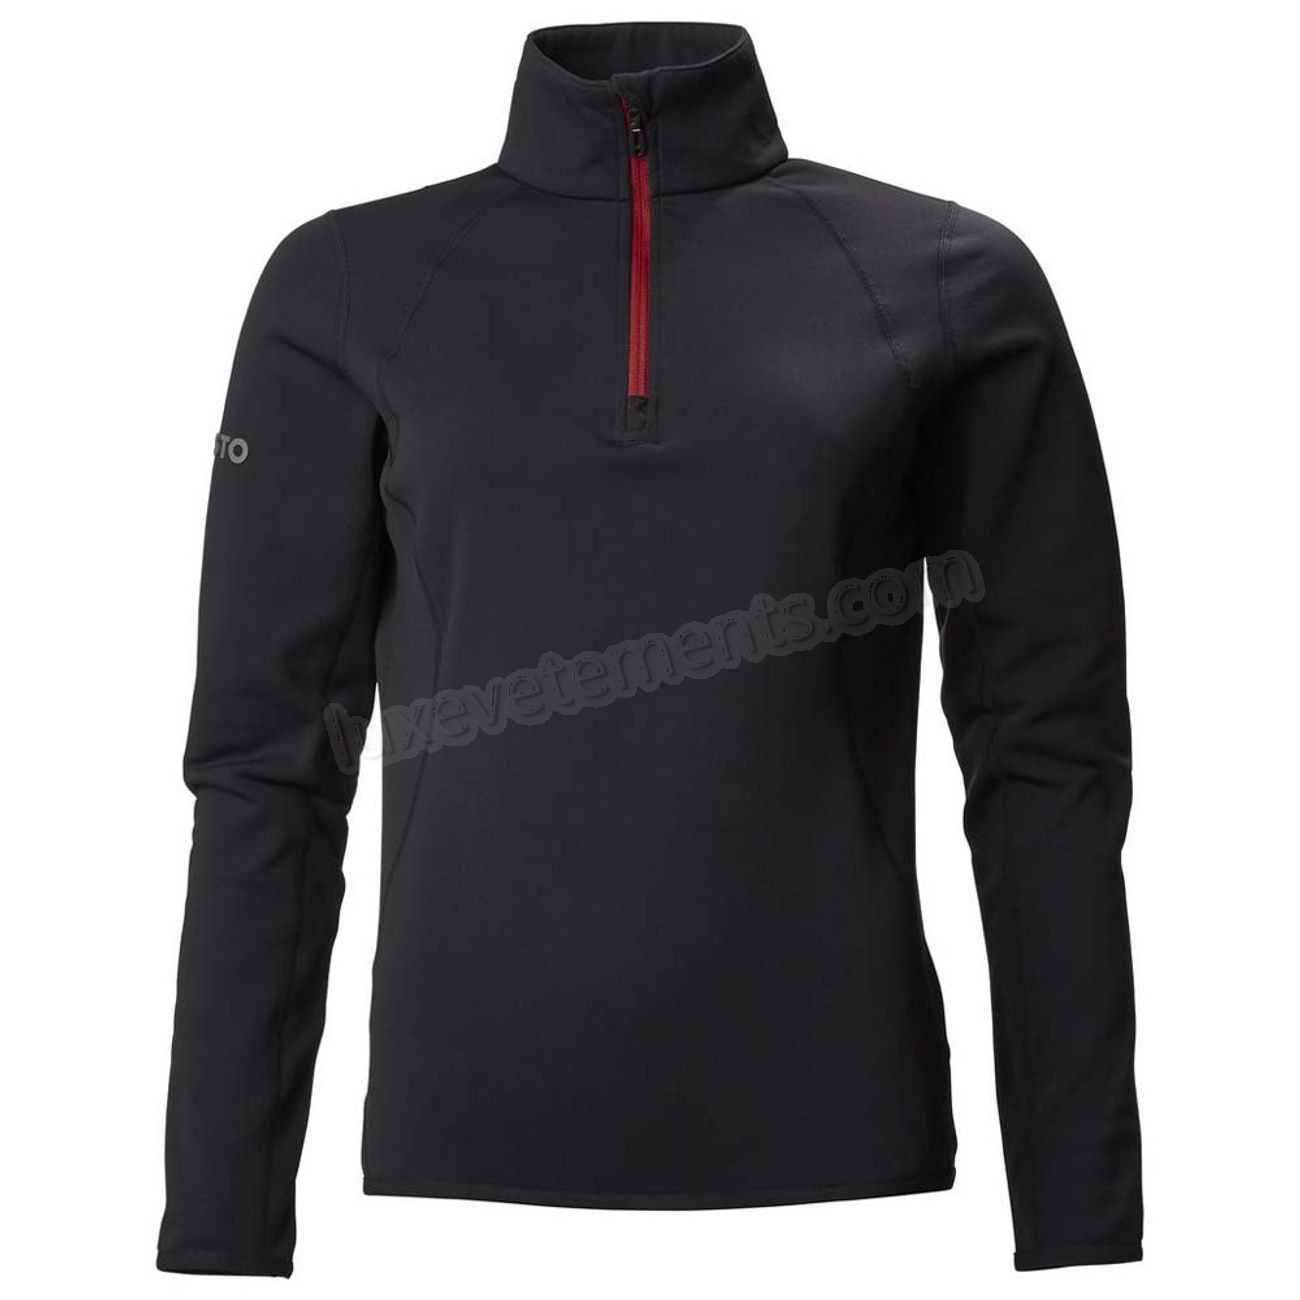 Musto-Loisirs femme MUSTO Musto Synergy Micro Vente en ligne - Musto-Loisirs femme MUSTO Musto Synergy Micro Vente en ligne